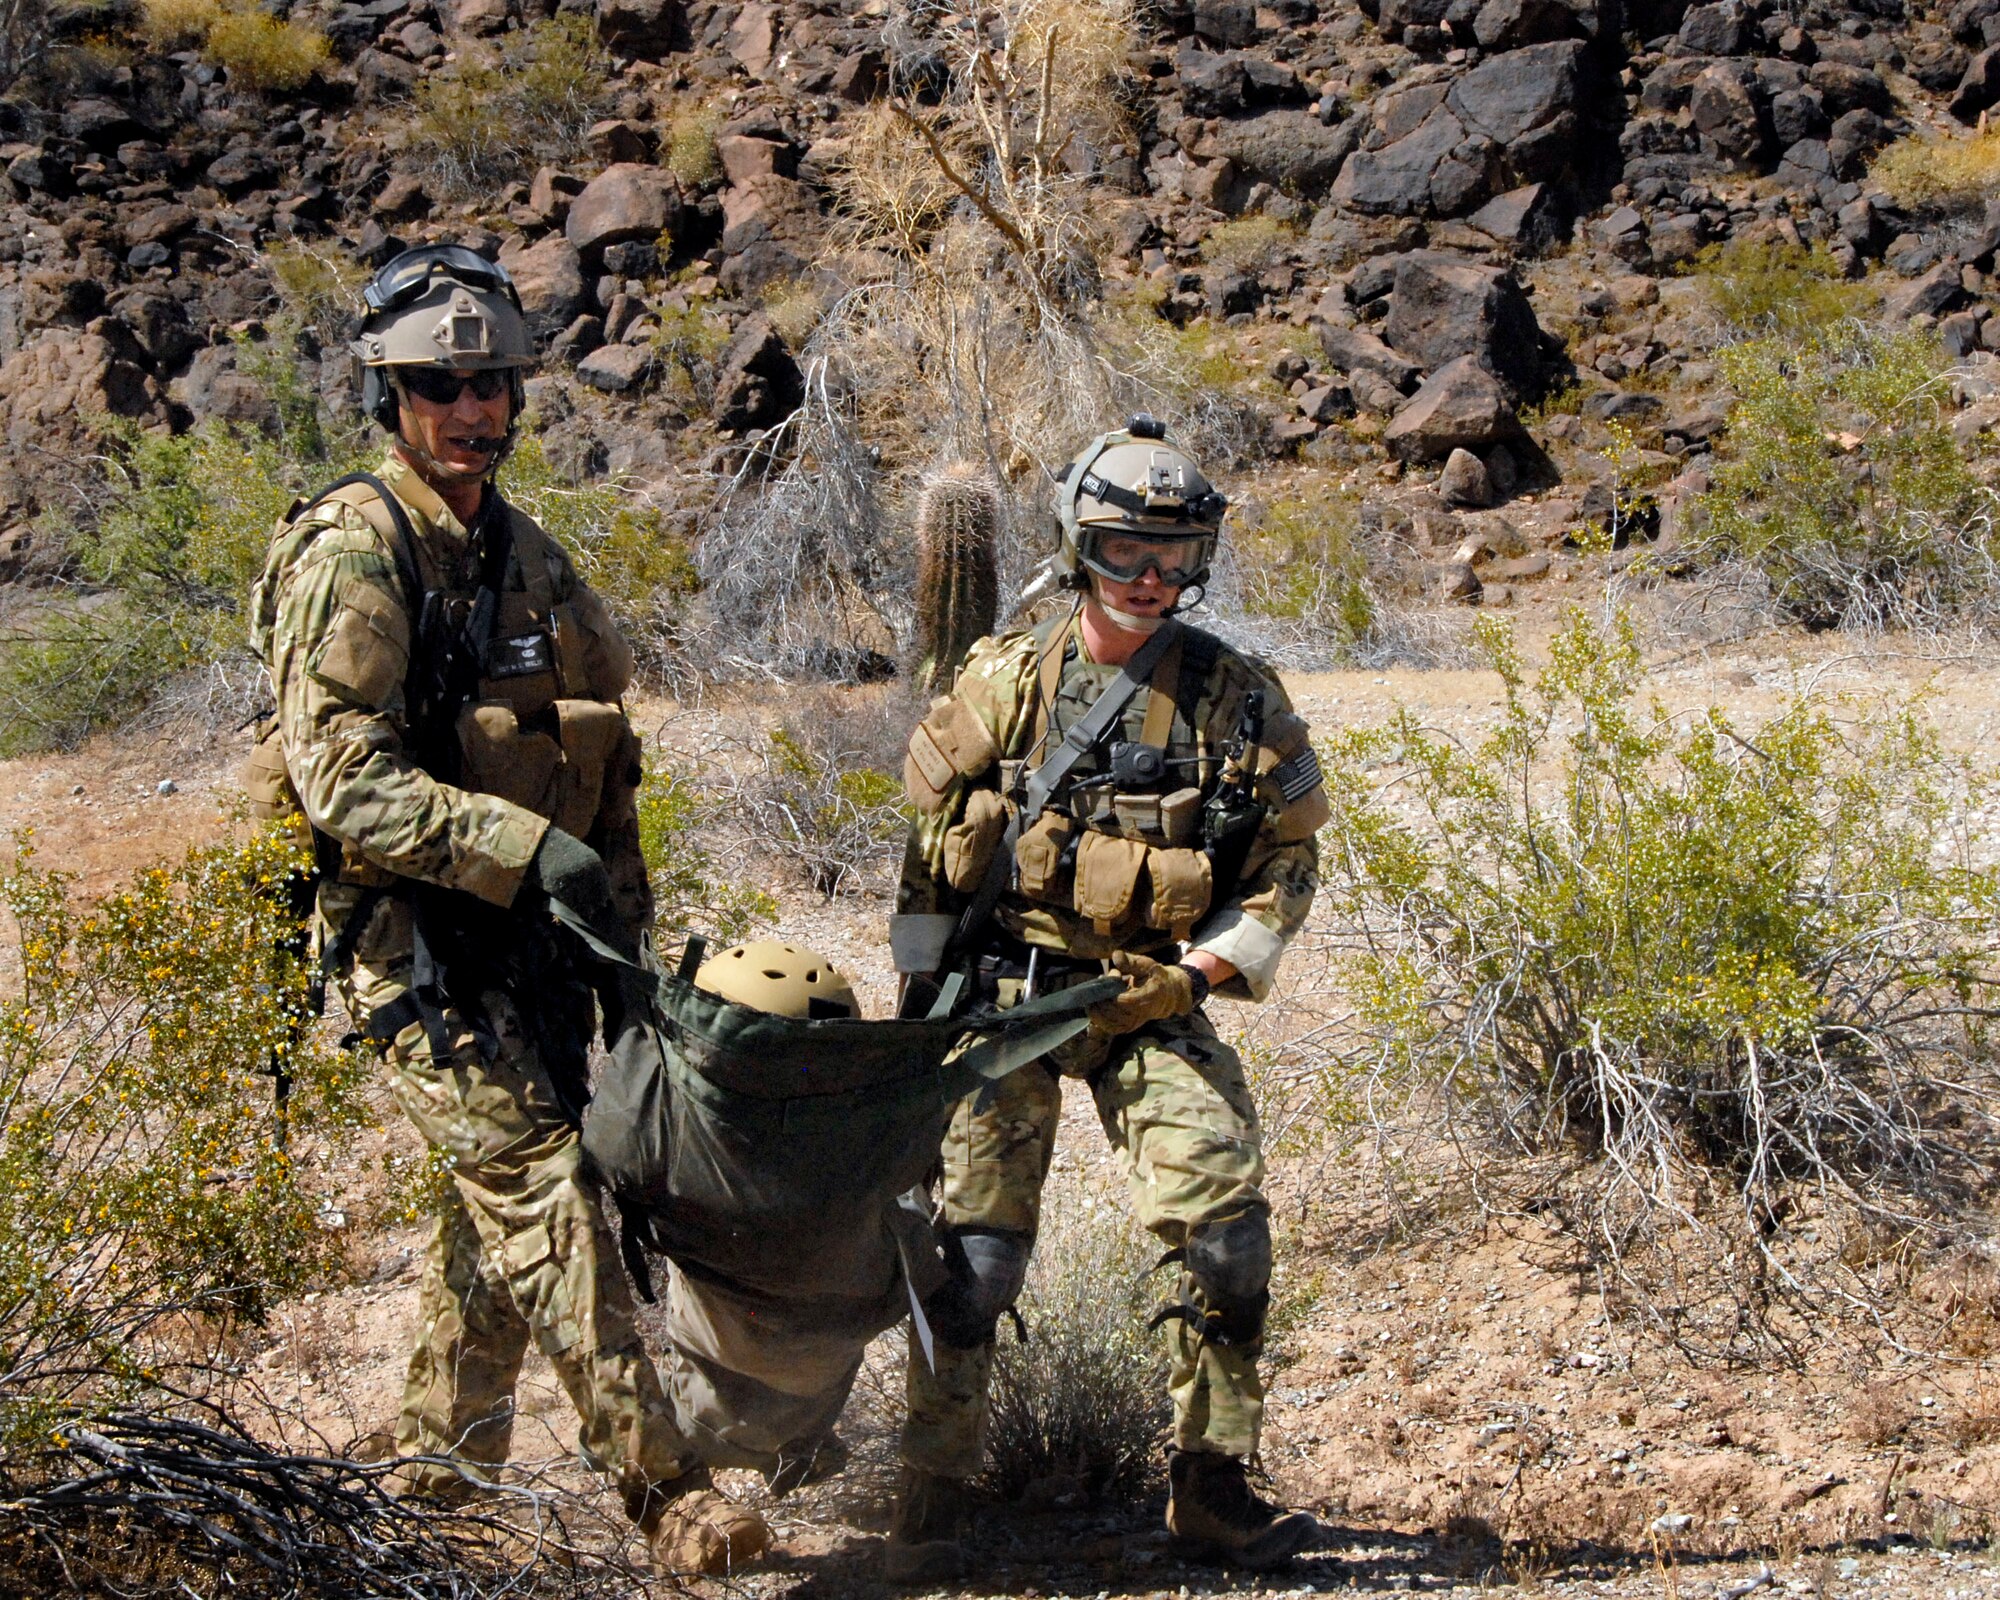 Pararescuemen participating in an Angel Thunder combat search and rescue mission at the Barry M. Goldwater range in the Sonoran Desert outside Davis-Monthan Air Force Base carry the volunteer survivor to the HH-60G Pave Hawk rescue helicopter. (U.S. Air National Guard photo/Airman 1st Class Jessica Green)